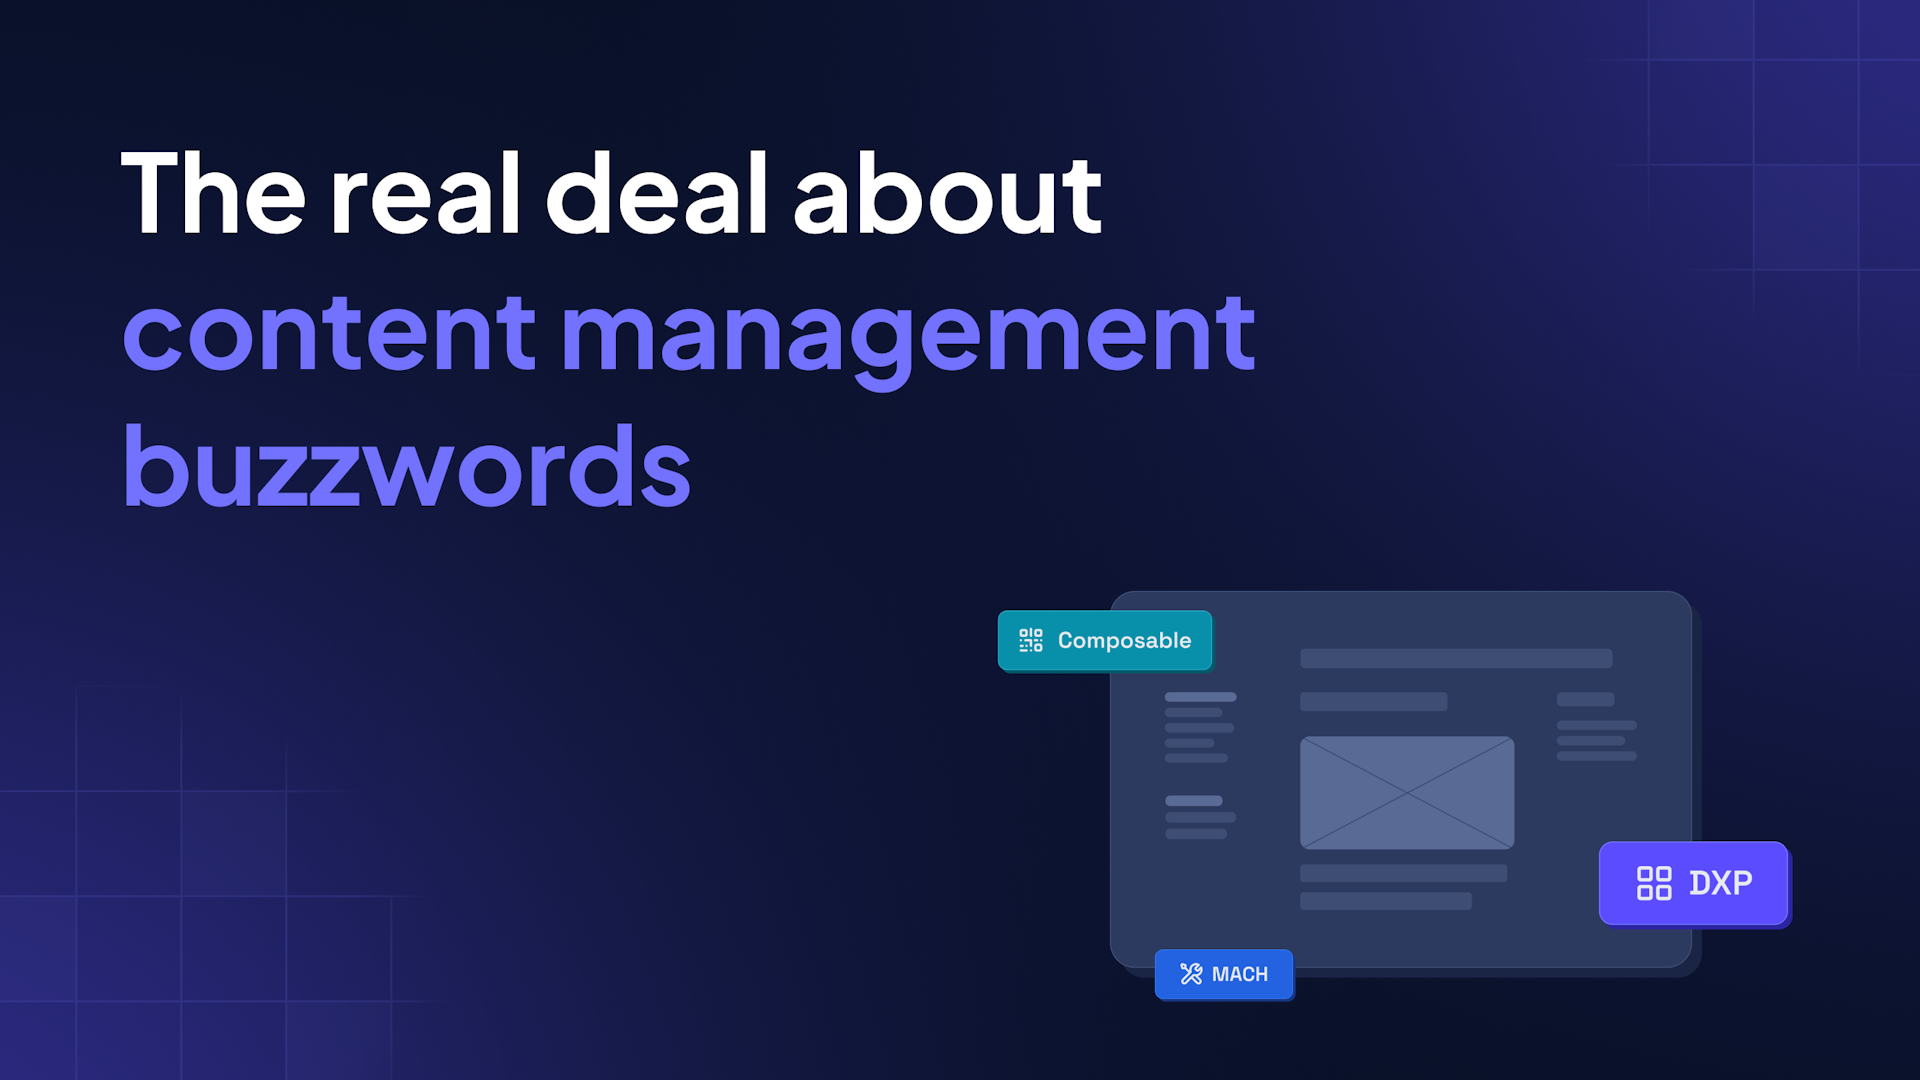 The real deal about content management buzzwords